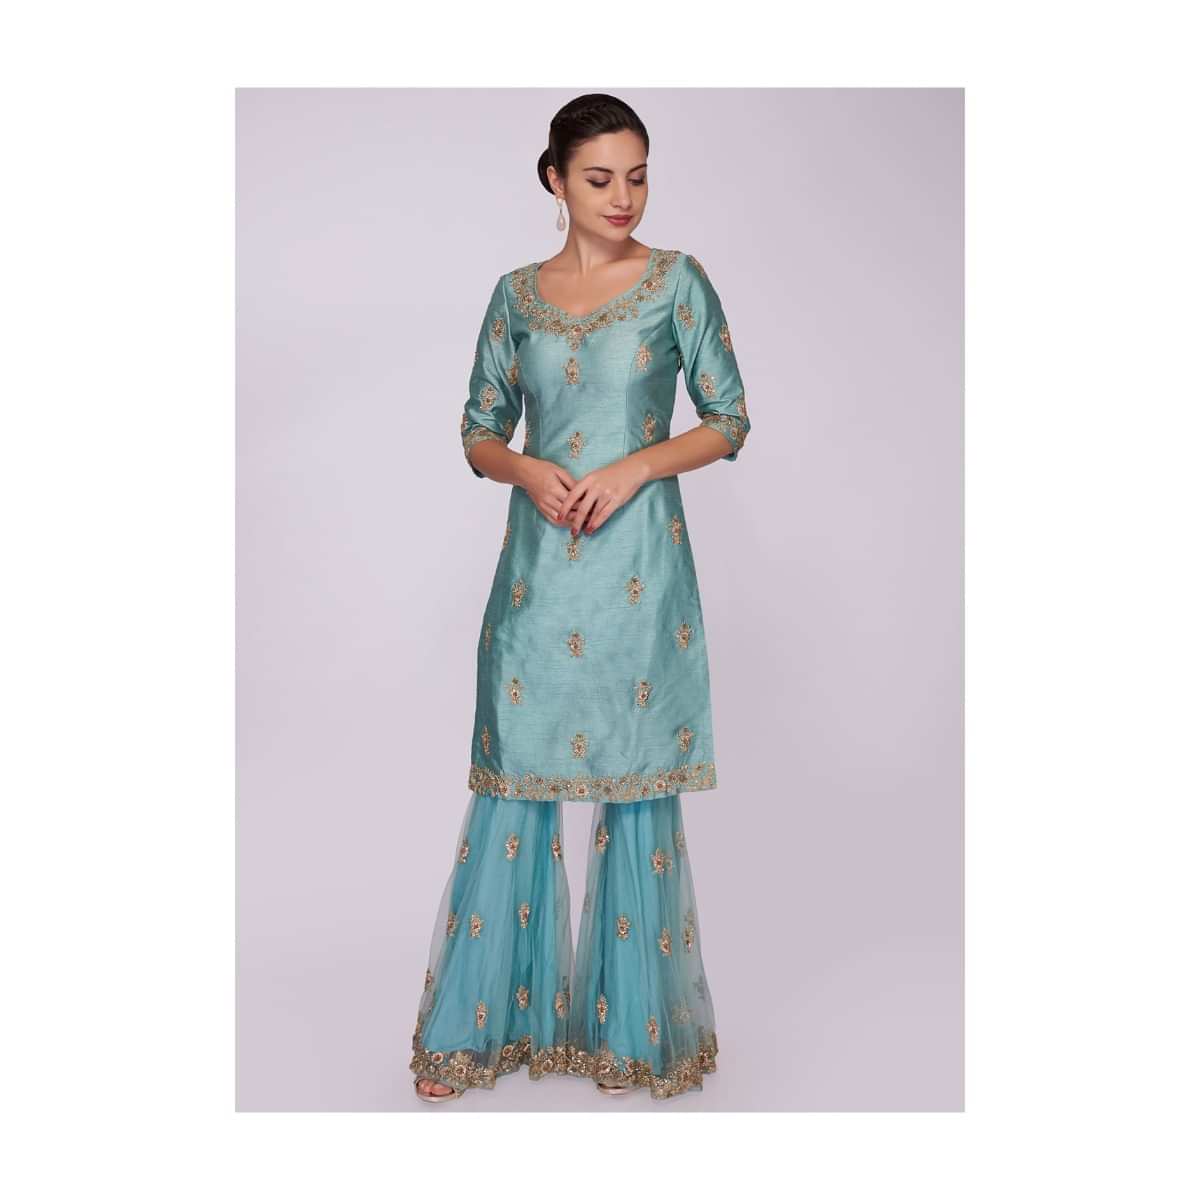 Turq blue raw silk sharara suit adorn in floral zari embroidery only on Kalki